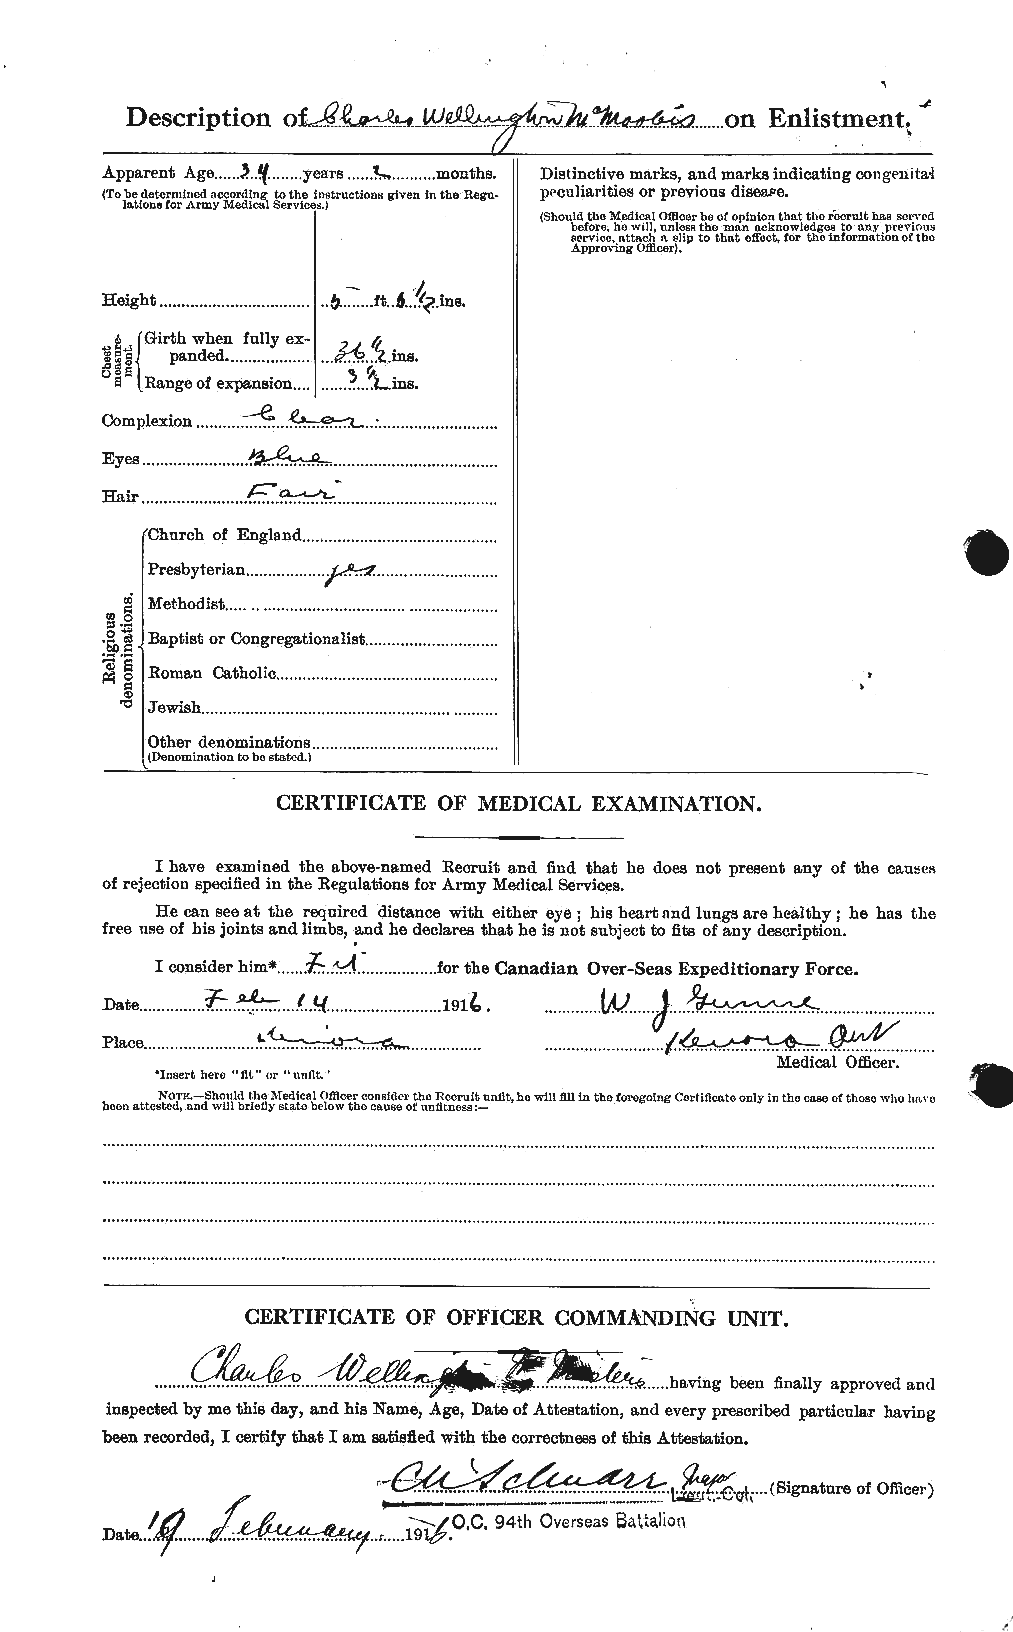 Personnel Records of the First World War - CEF 539911b